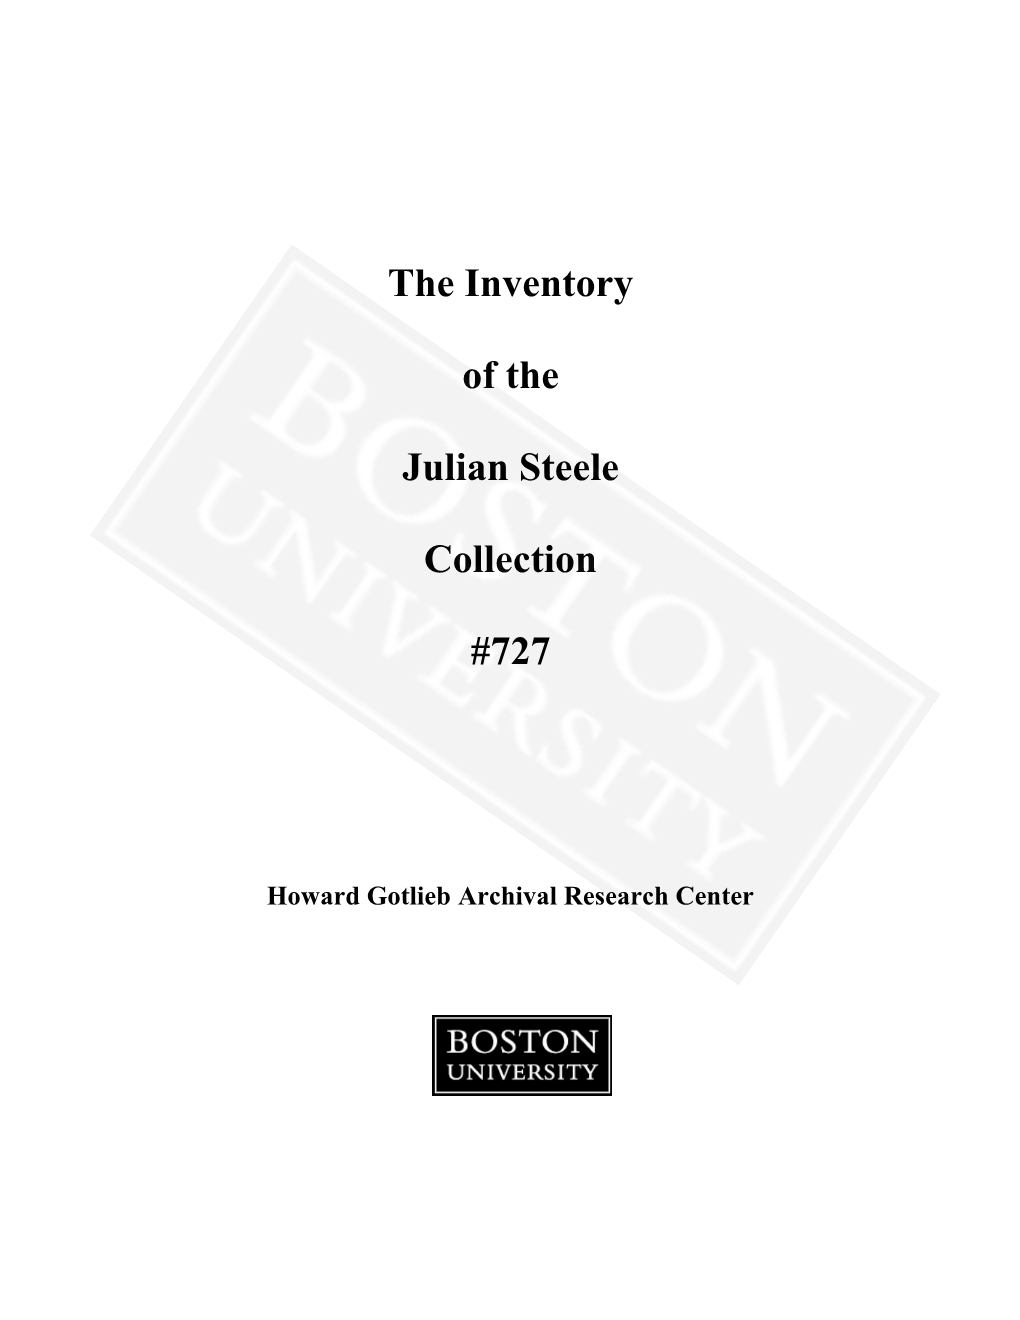 The Inventory of the Julian Steele Collection #727